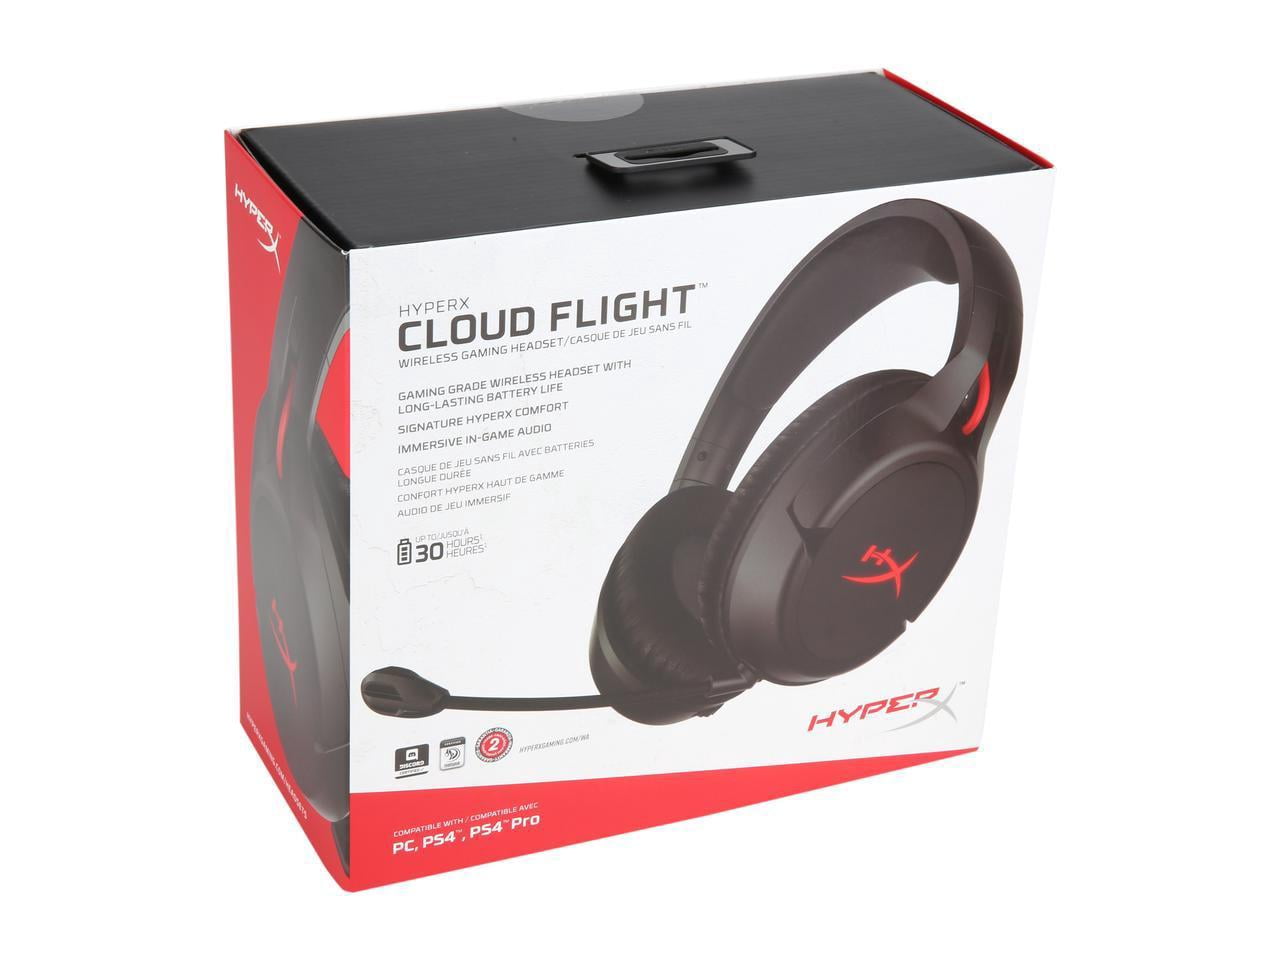 Hyperx Cloud Flight Wireless Gaming Headset 30 Hour Battery Life Immersive In Game Audio Intuitive Audio And Mic Controls Led Lighting Effects Works With Pc Ps4 Walmart Com Walmart Com